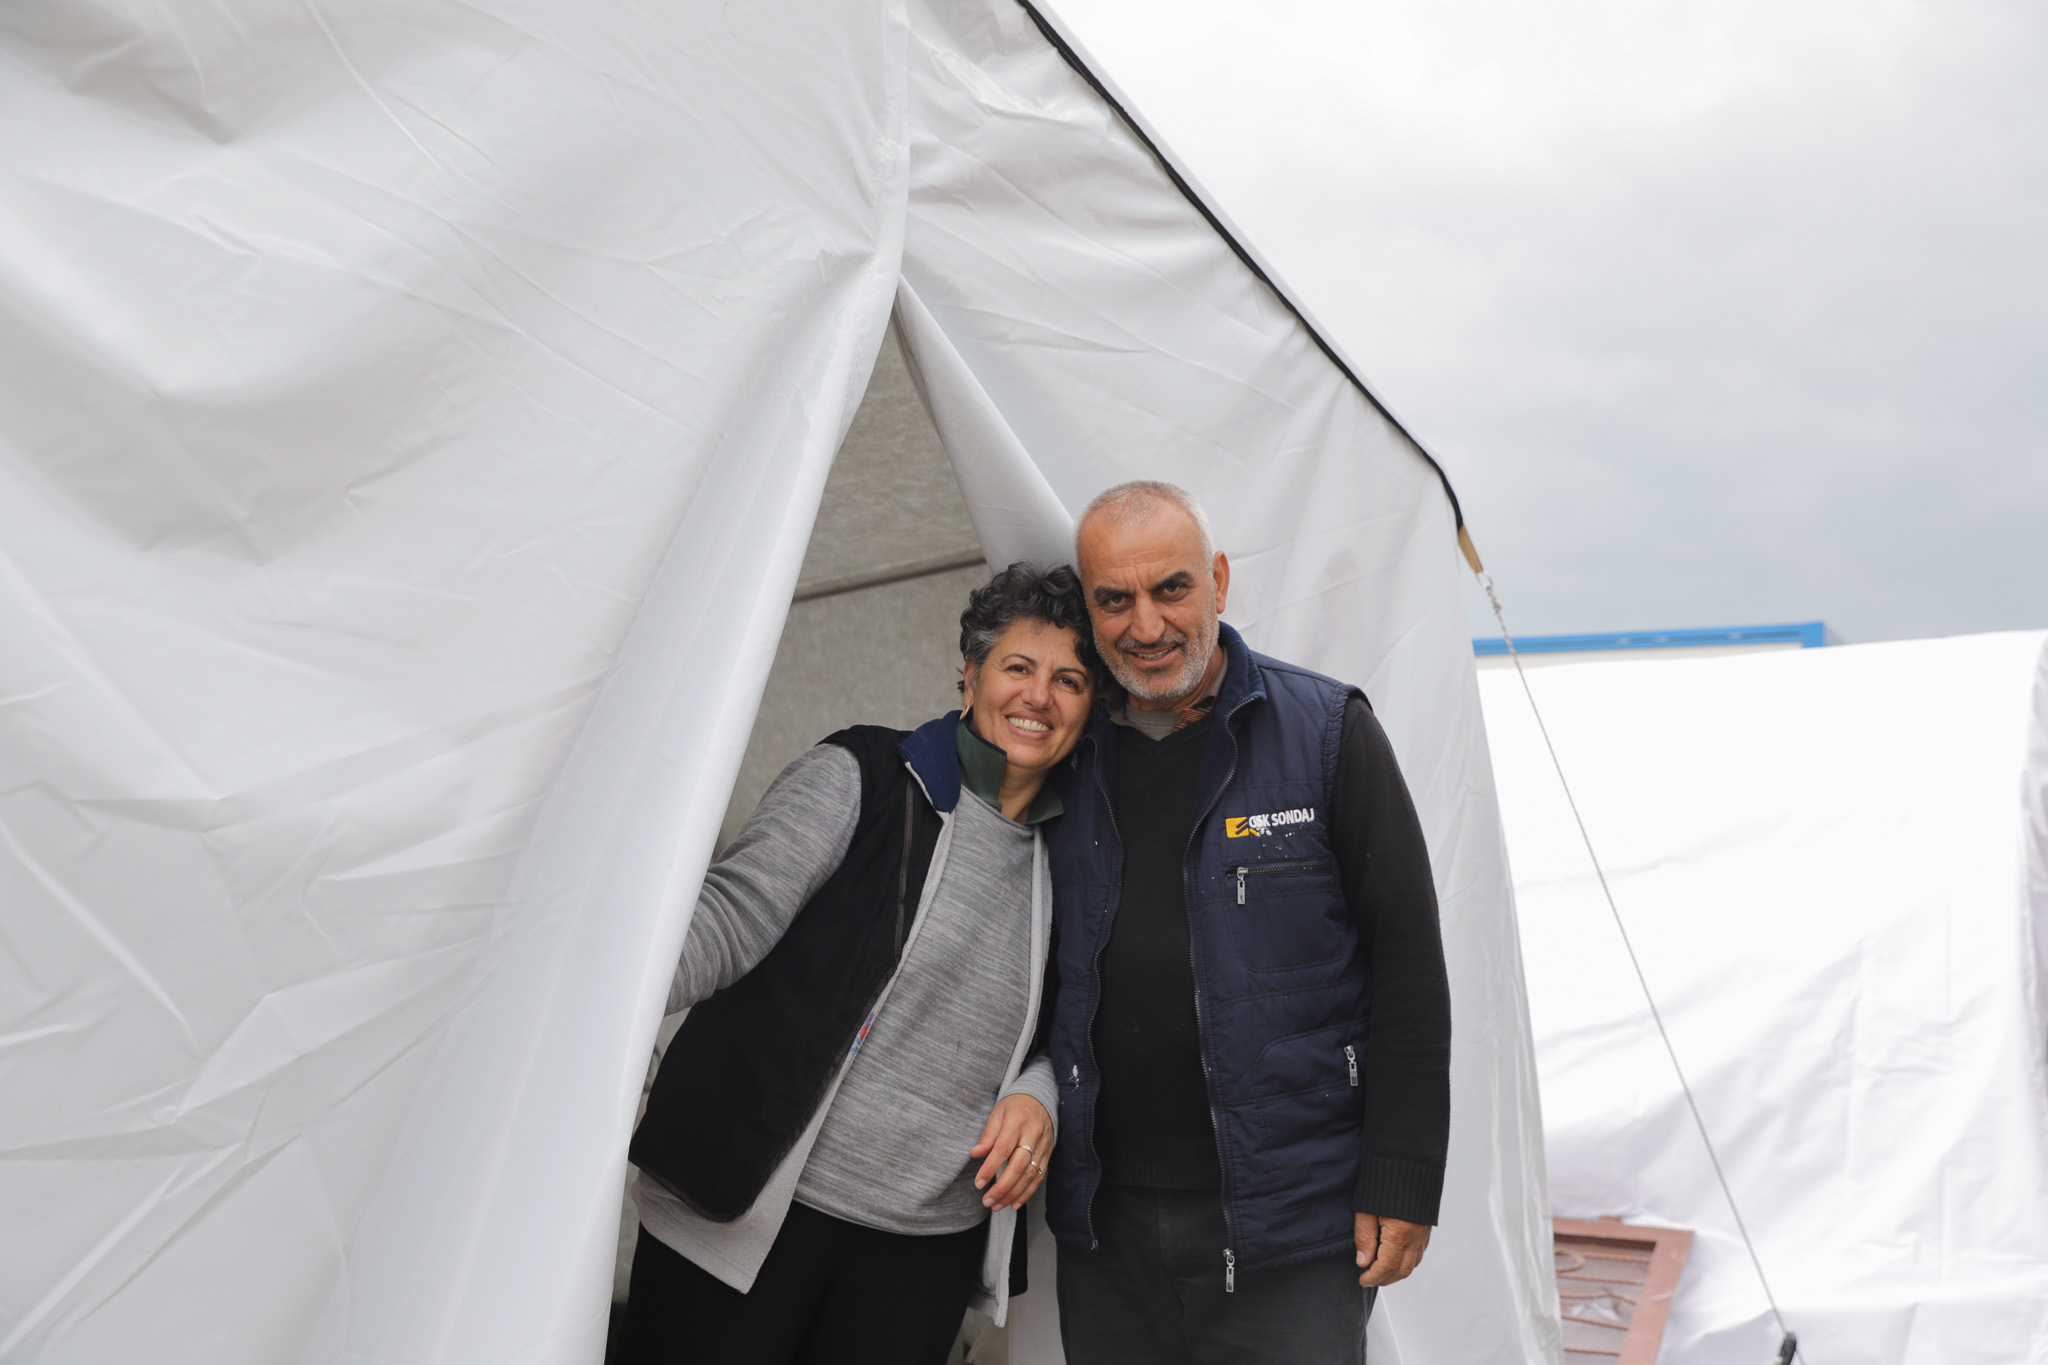 Nurgul and her husband stand in front of their ShelterBox Tent 